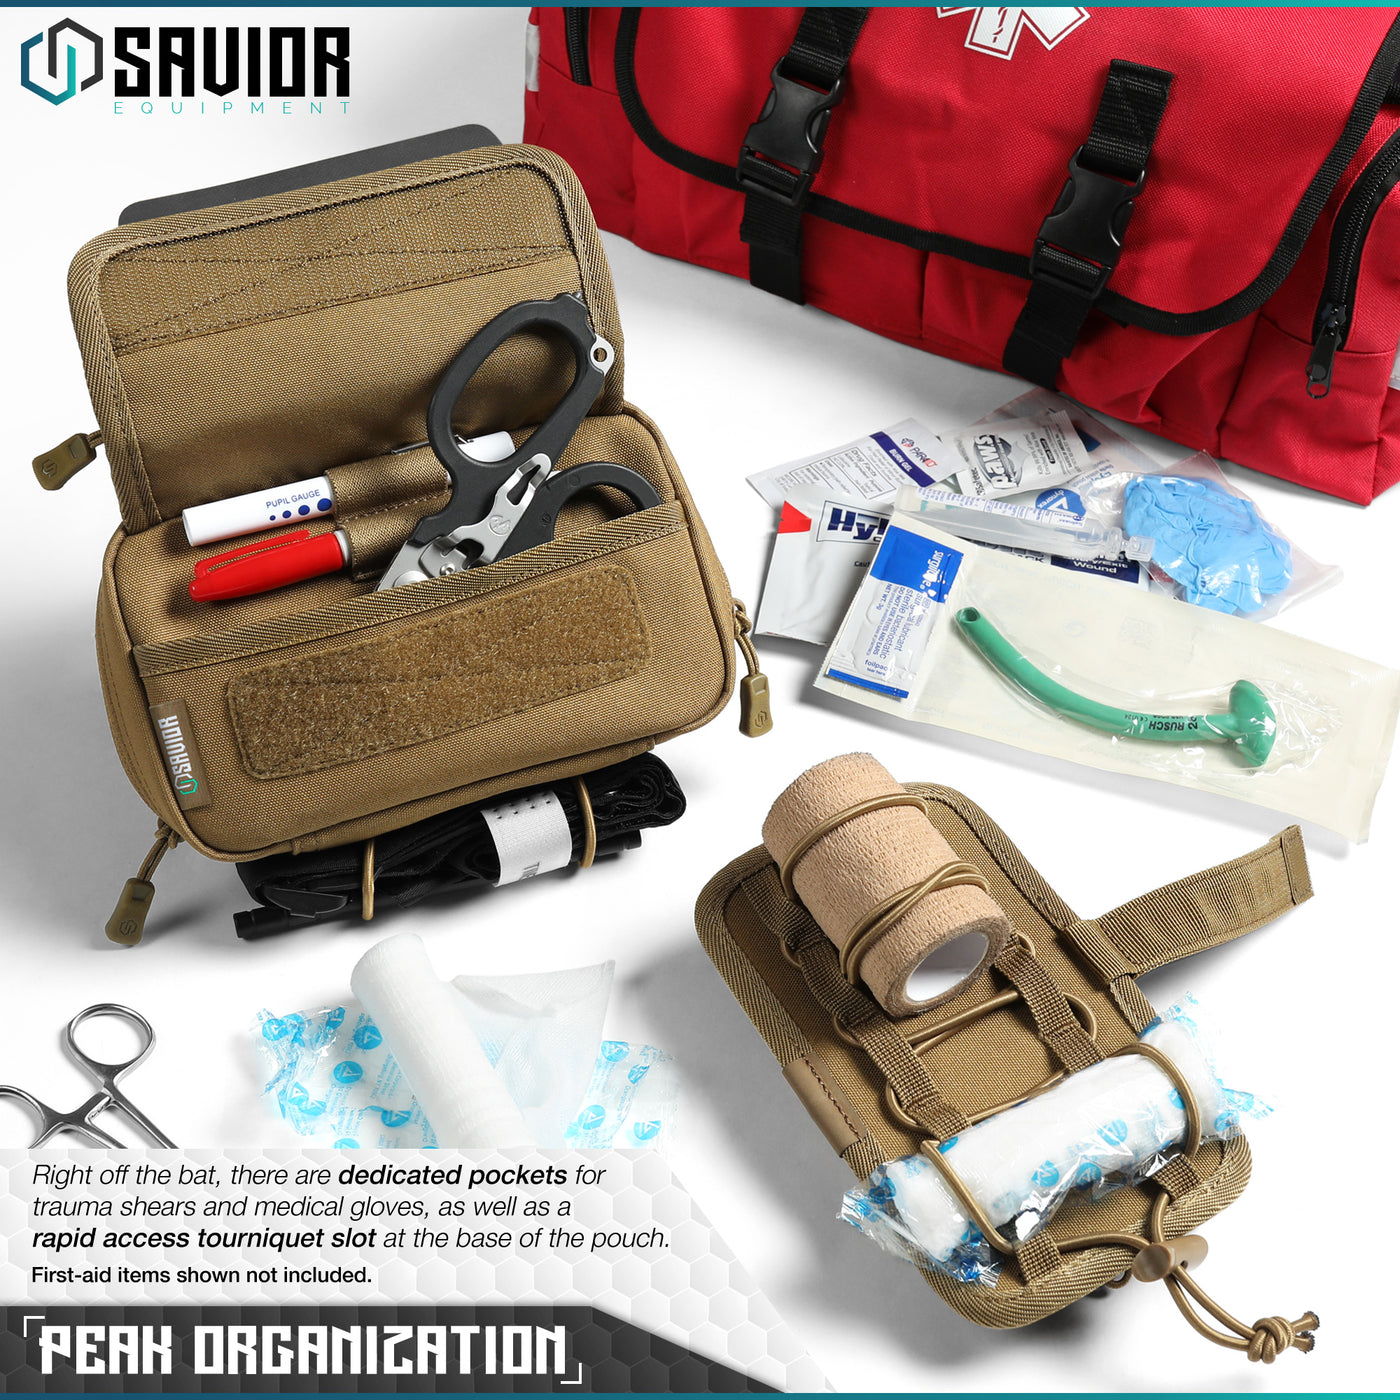 Peak Organization - Right off the bat, there are dedicated pockets for trauma shears and medical gloves, as well as a rapid access tourniquet slot at the base of the pouch. First-aid items shown not included.